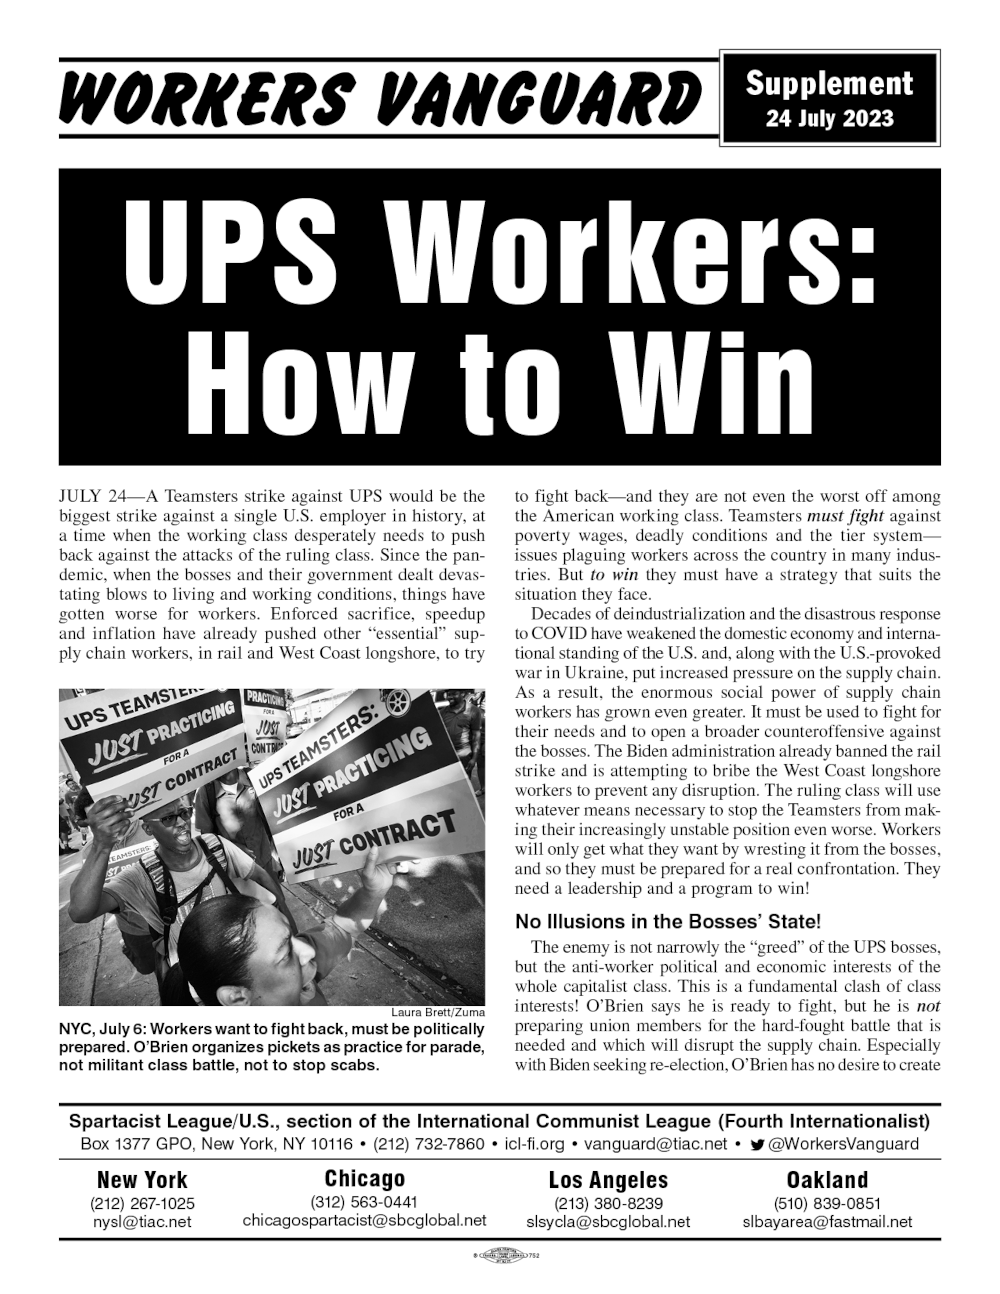 UPS Worker: How to Win  |  24 July 2023